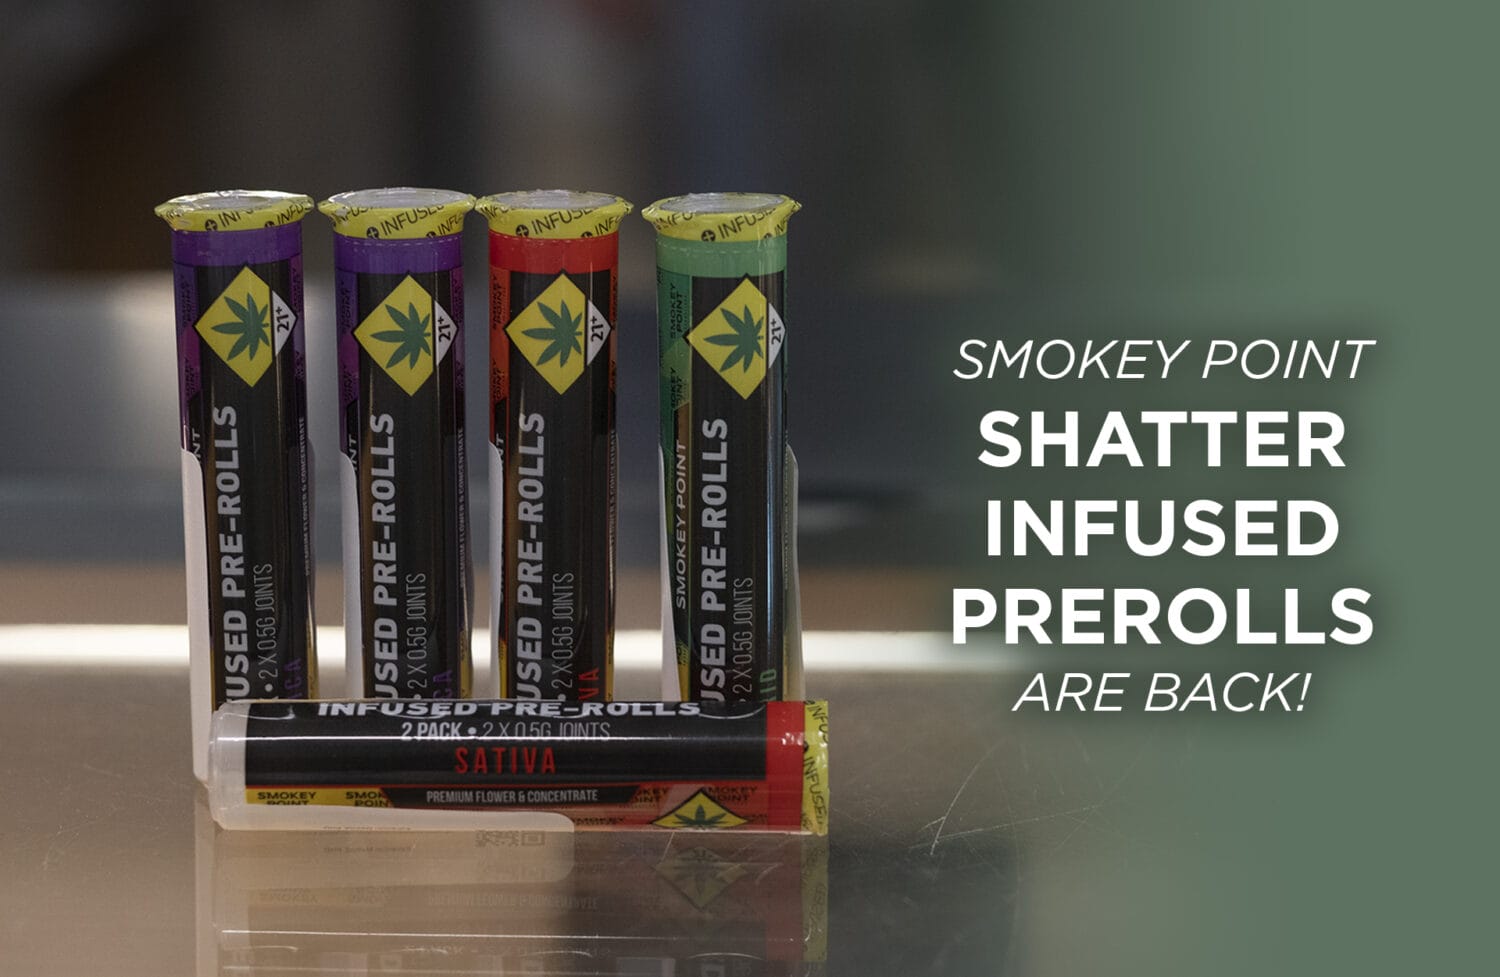 Smokey Point Shatter Joints